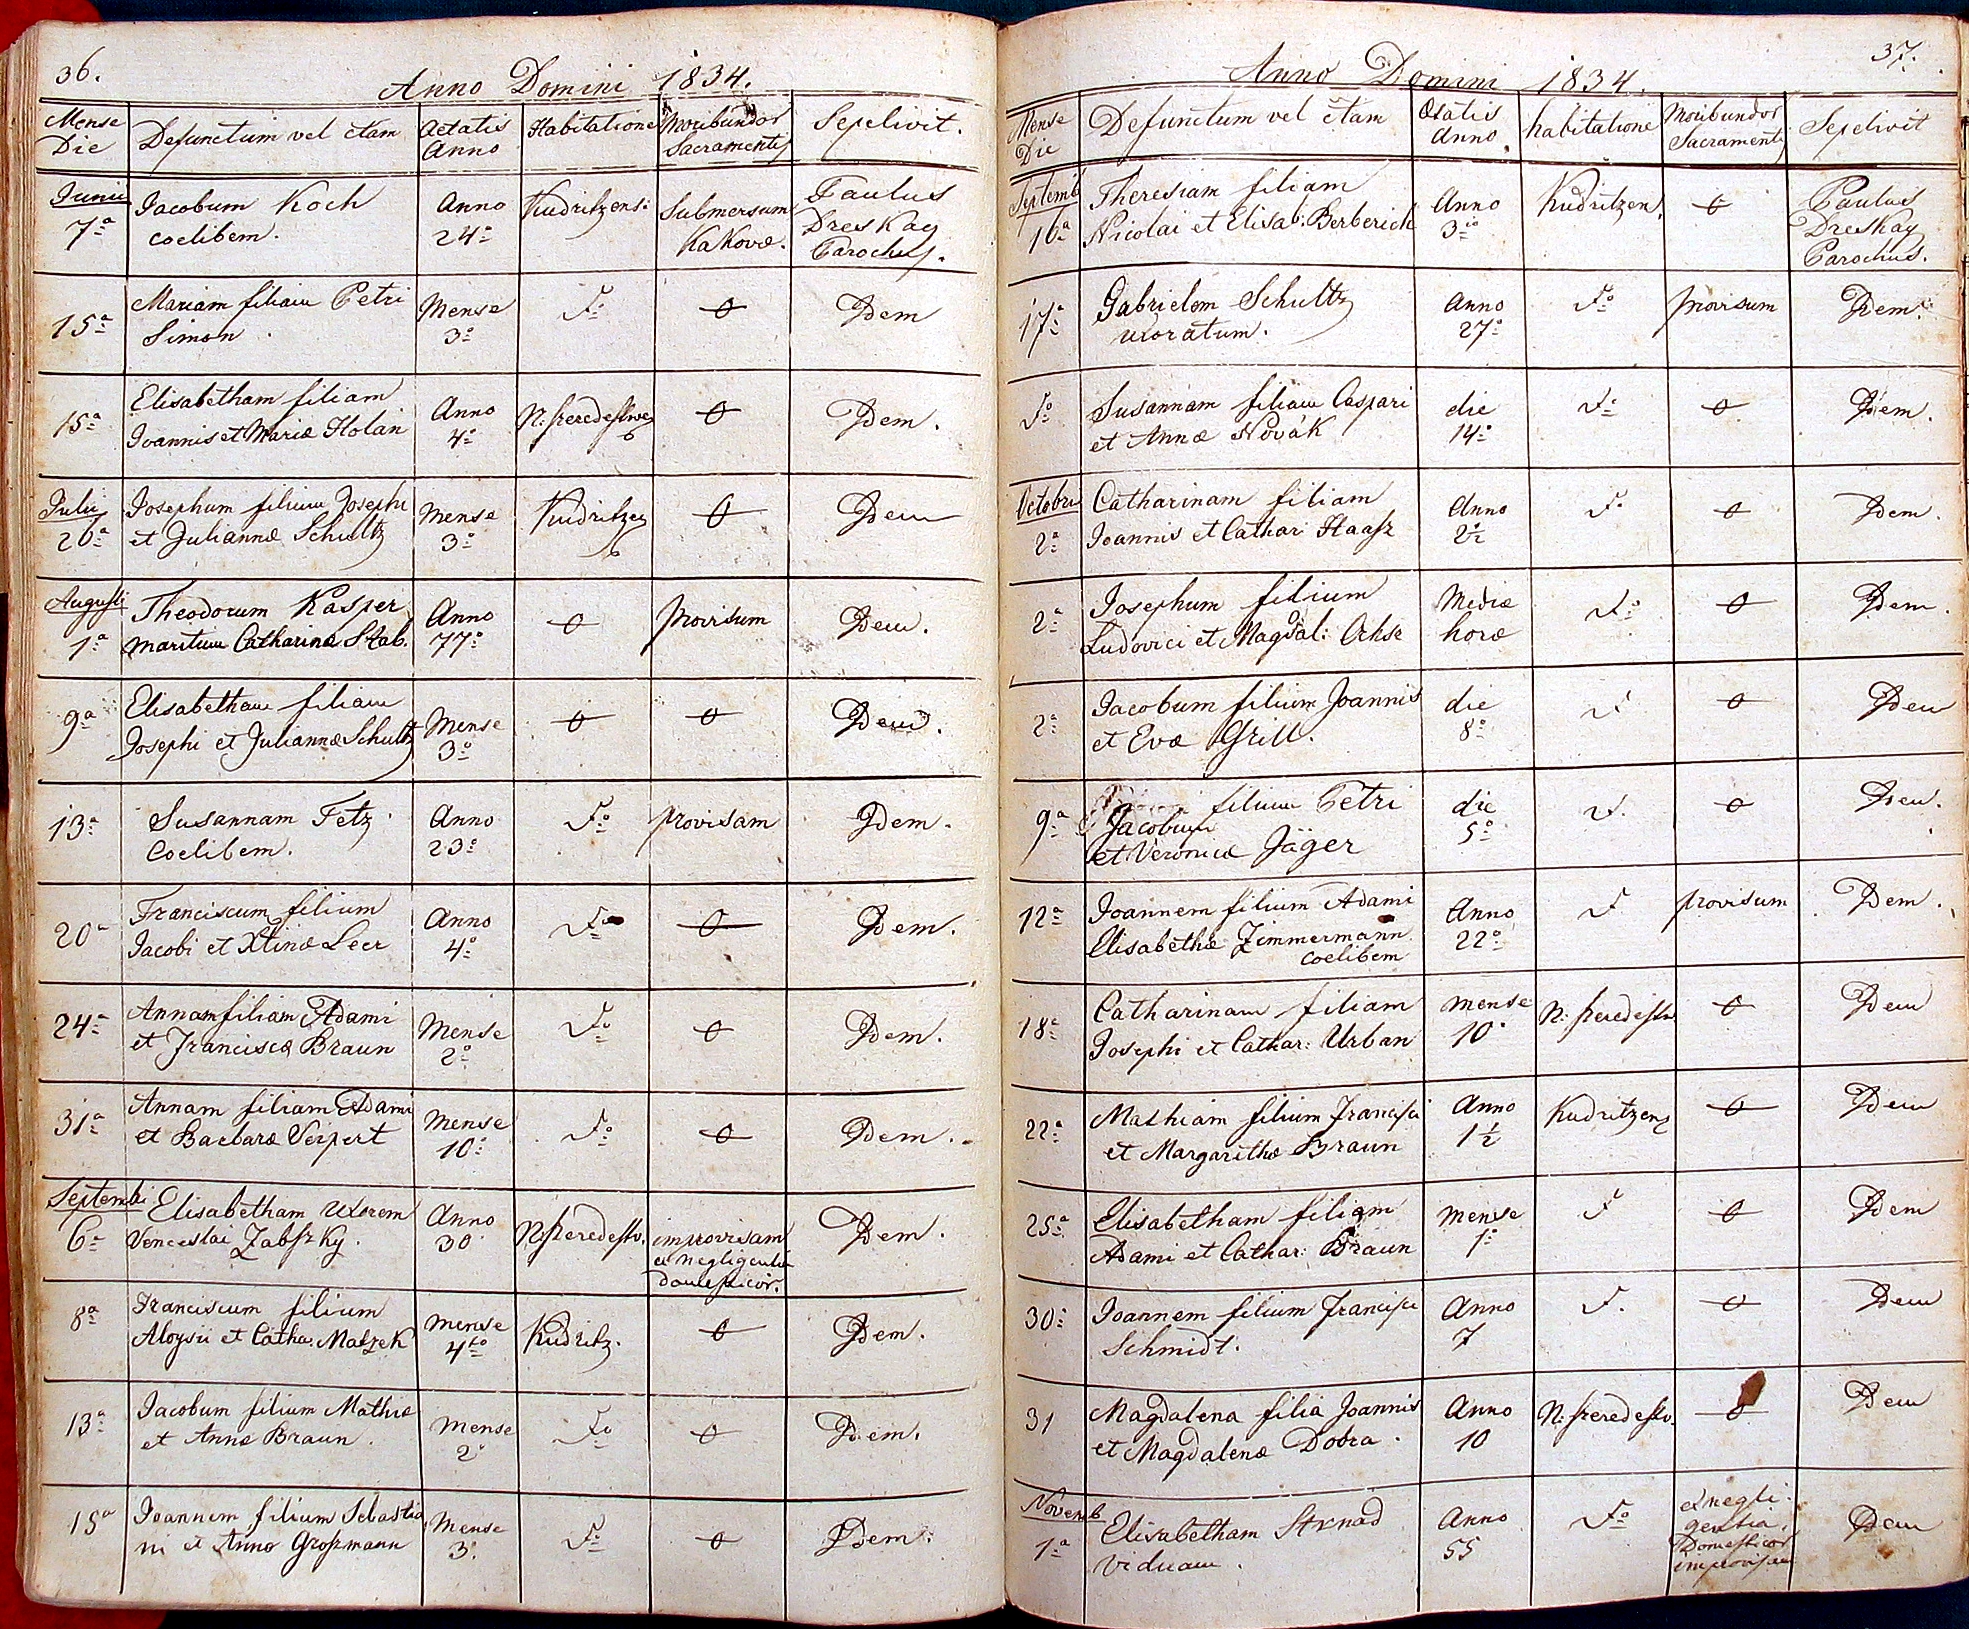 images/church_records/DEATHS/1829-1851D/036 i 037